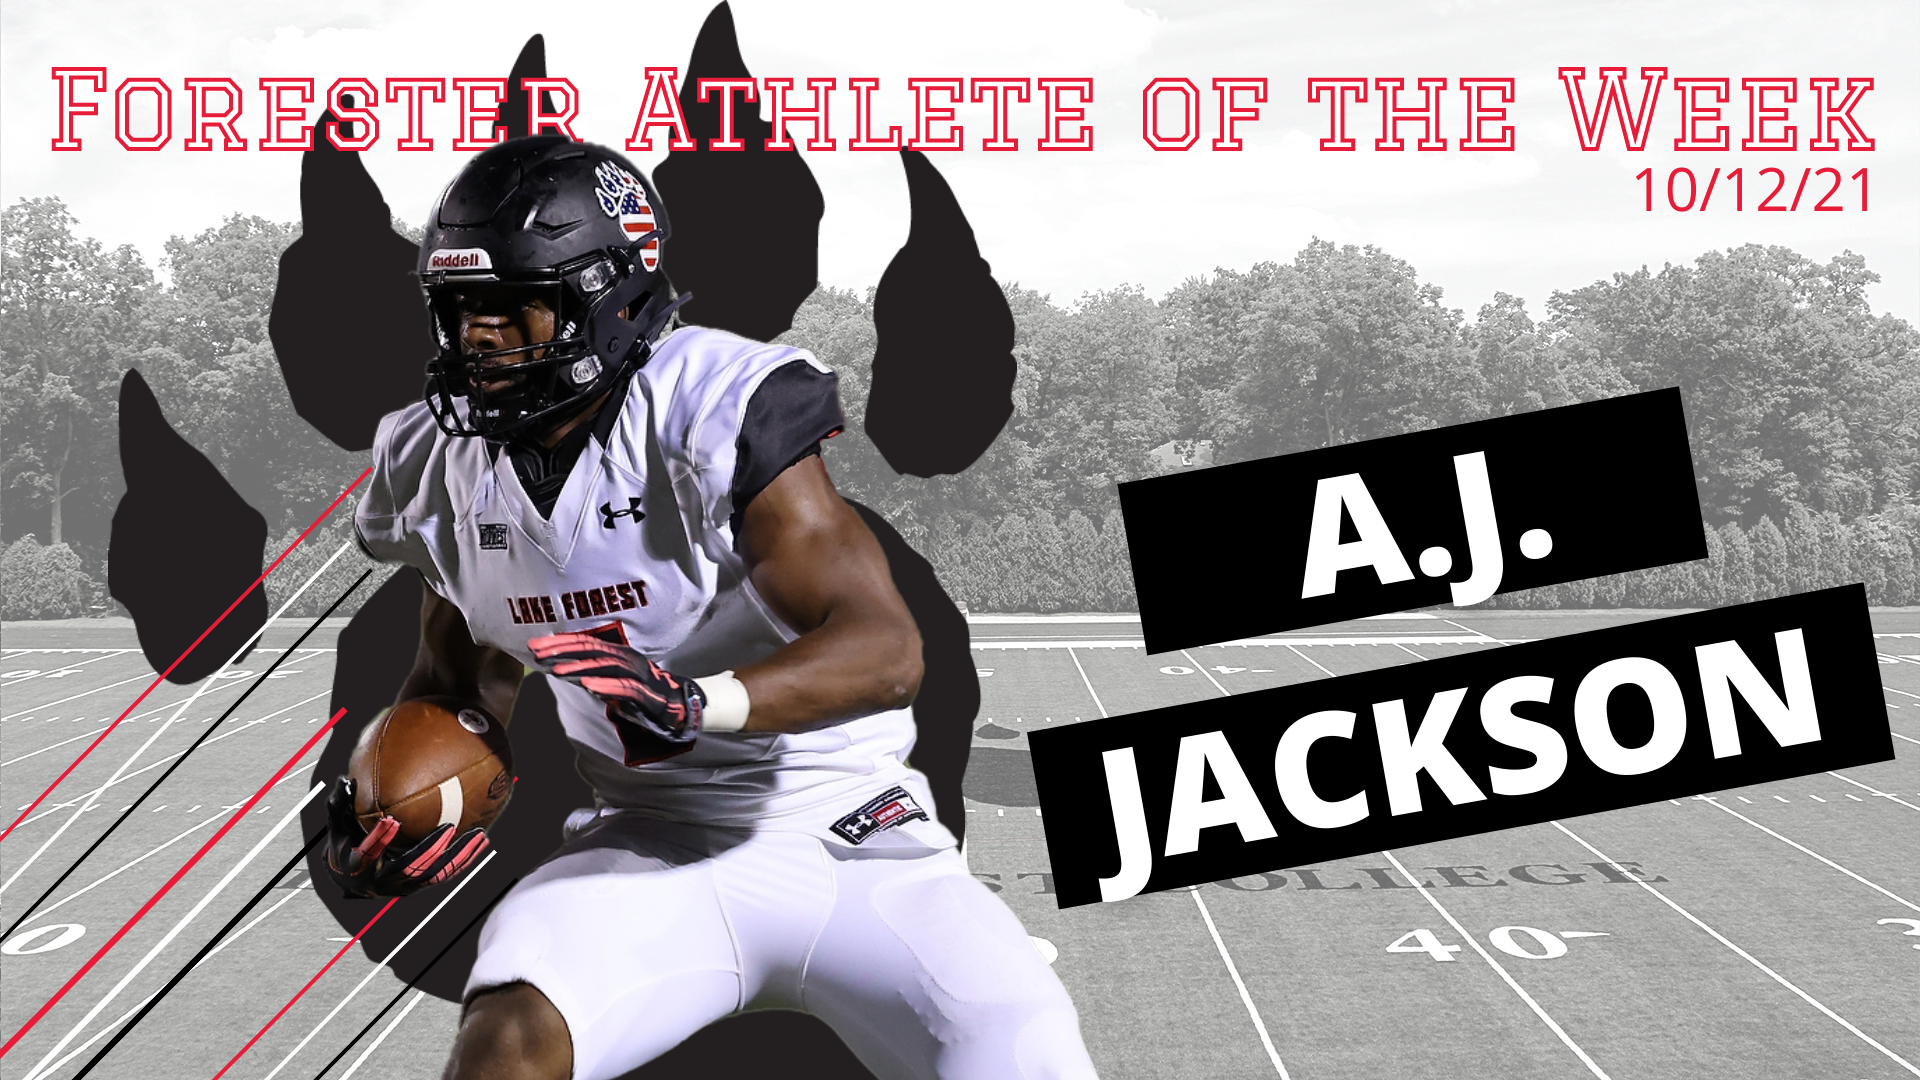 A.J. Jackson Earns Men's Forester Athlete of the Week Honors